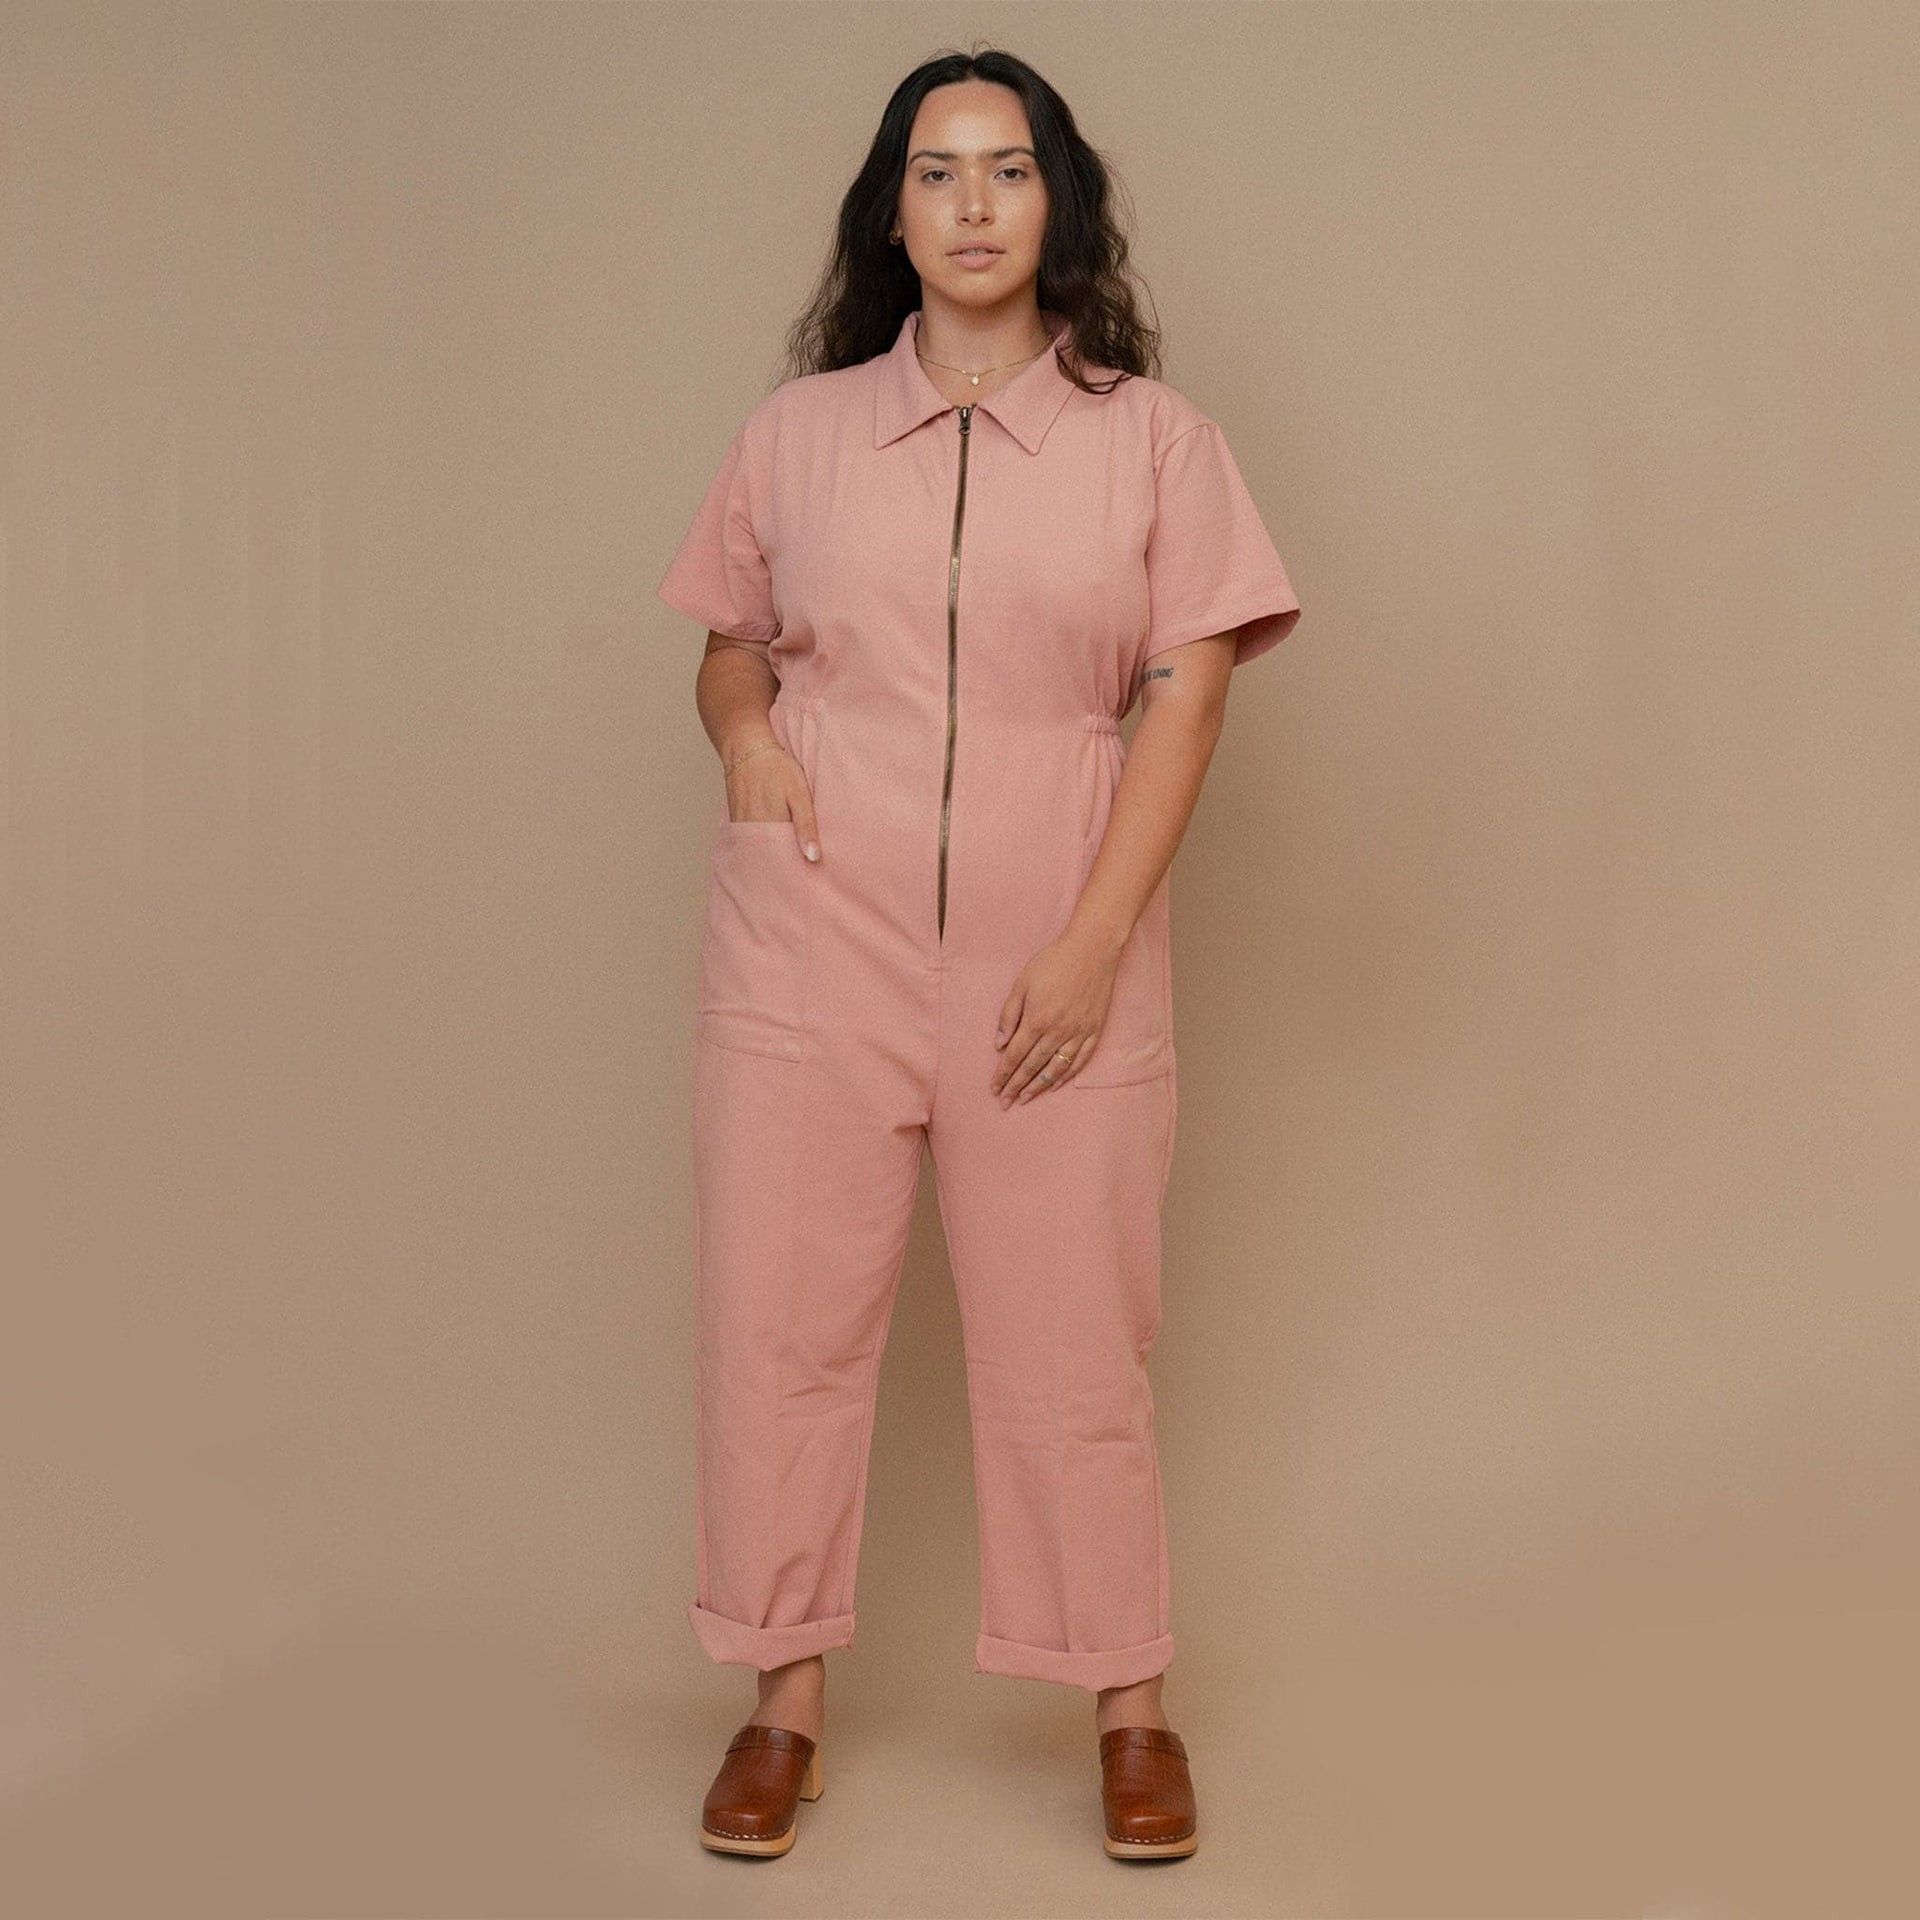 Why I'm Loving the Pink Utility Jumpsuit Trend